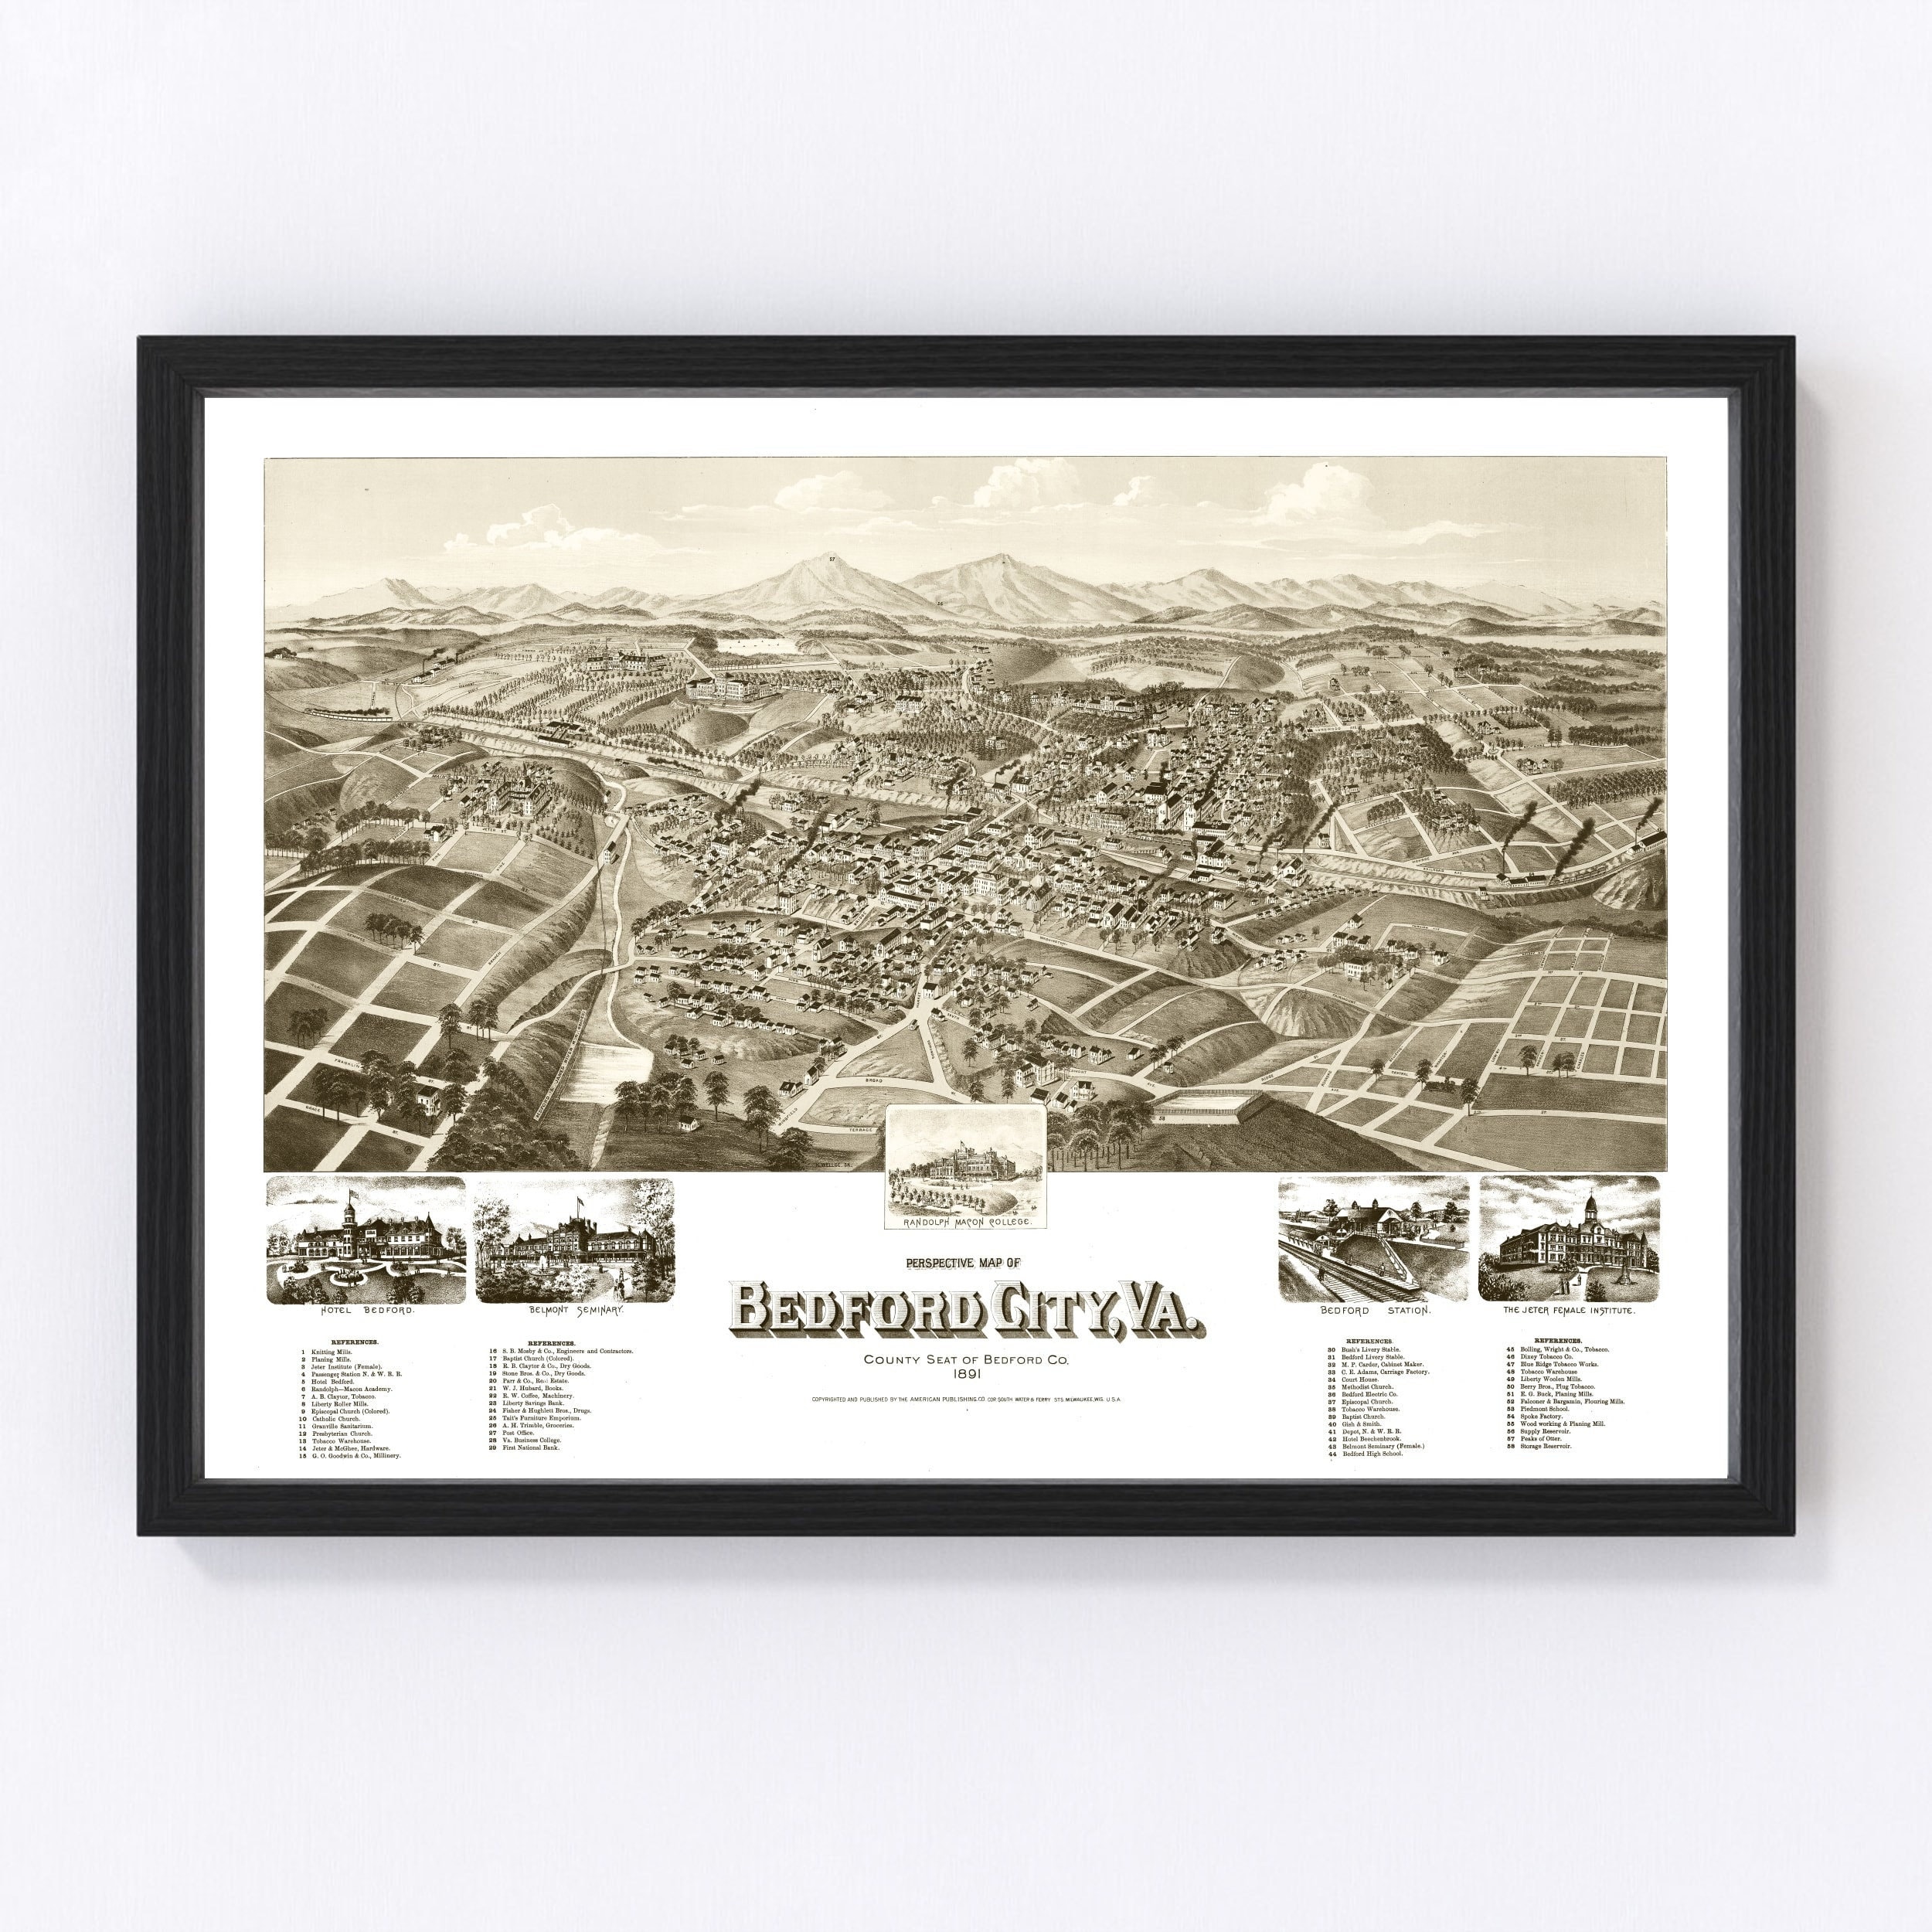 Bedford City Map 1891 Old Map of Bedford City Virginia Art - Etsy 日本